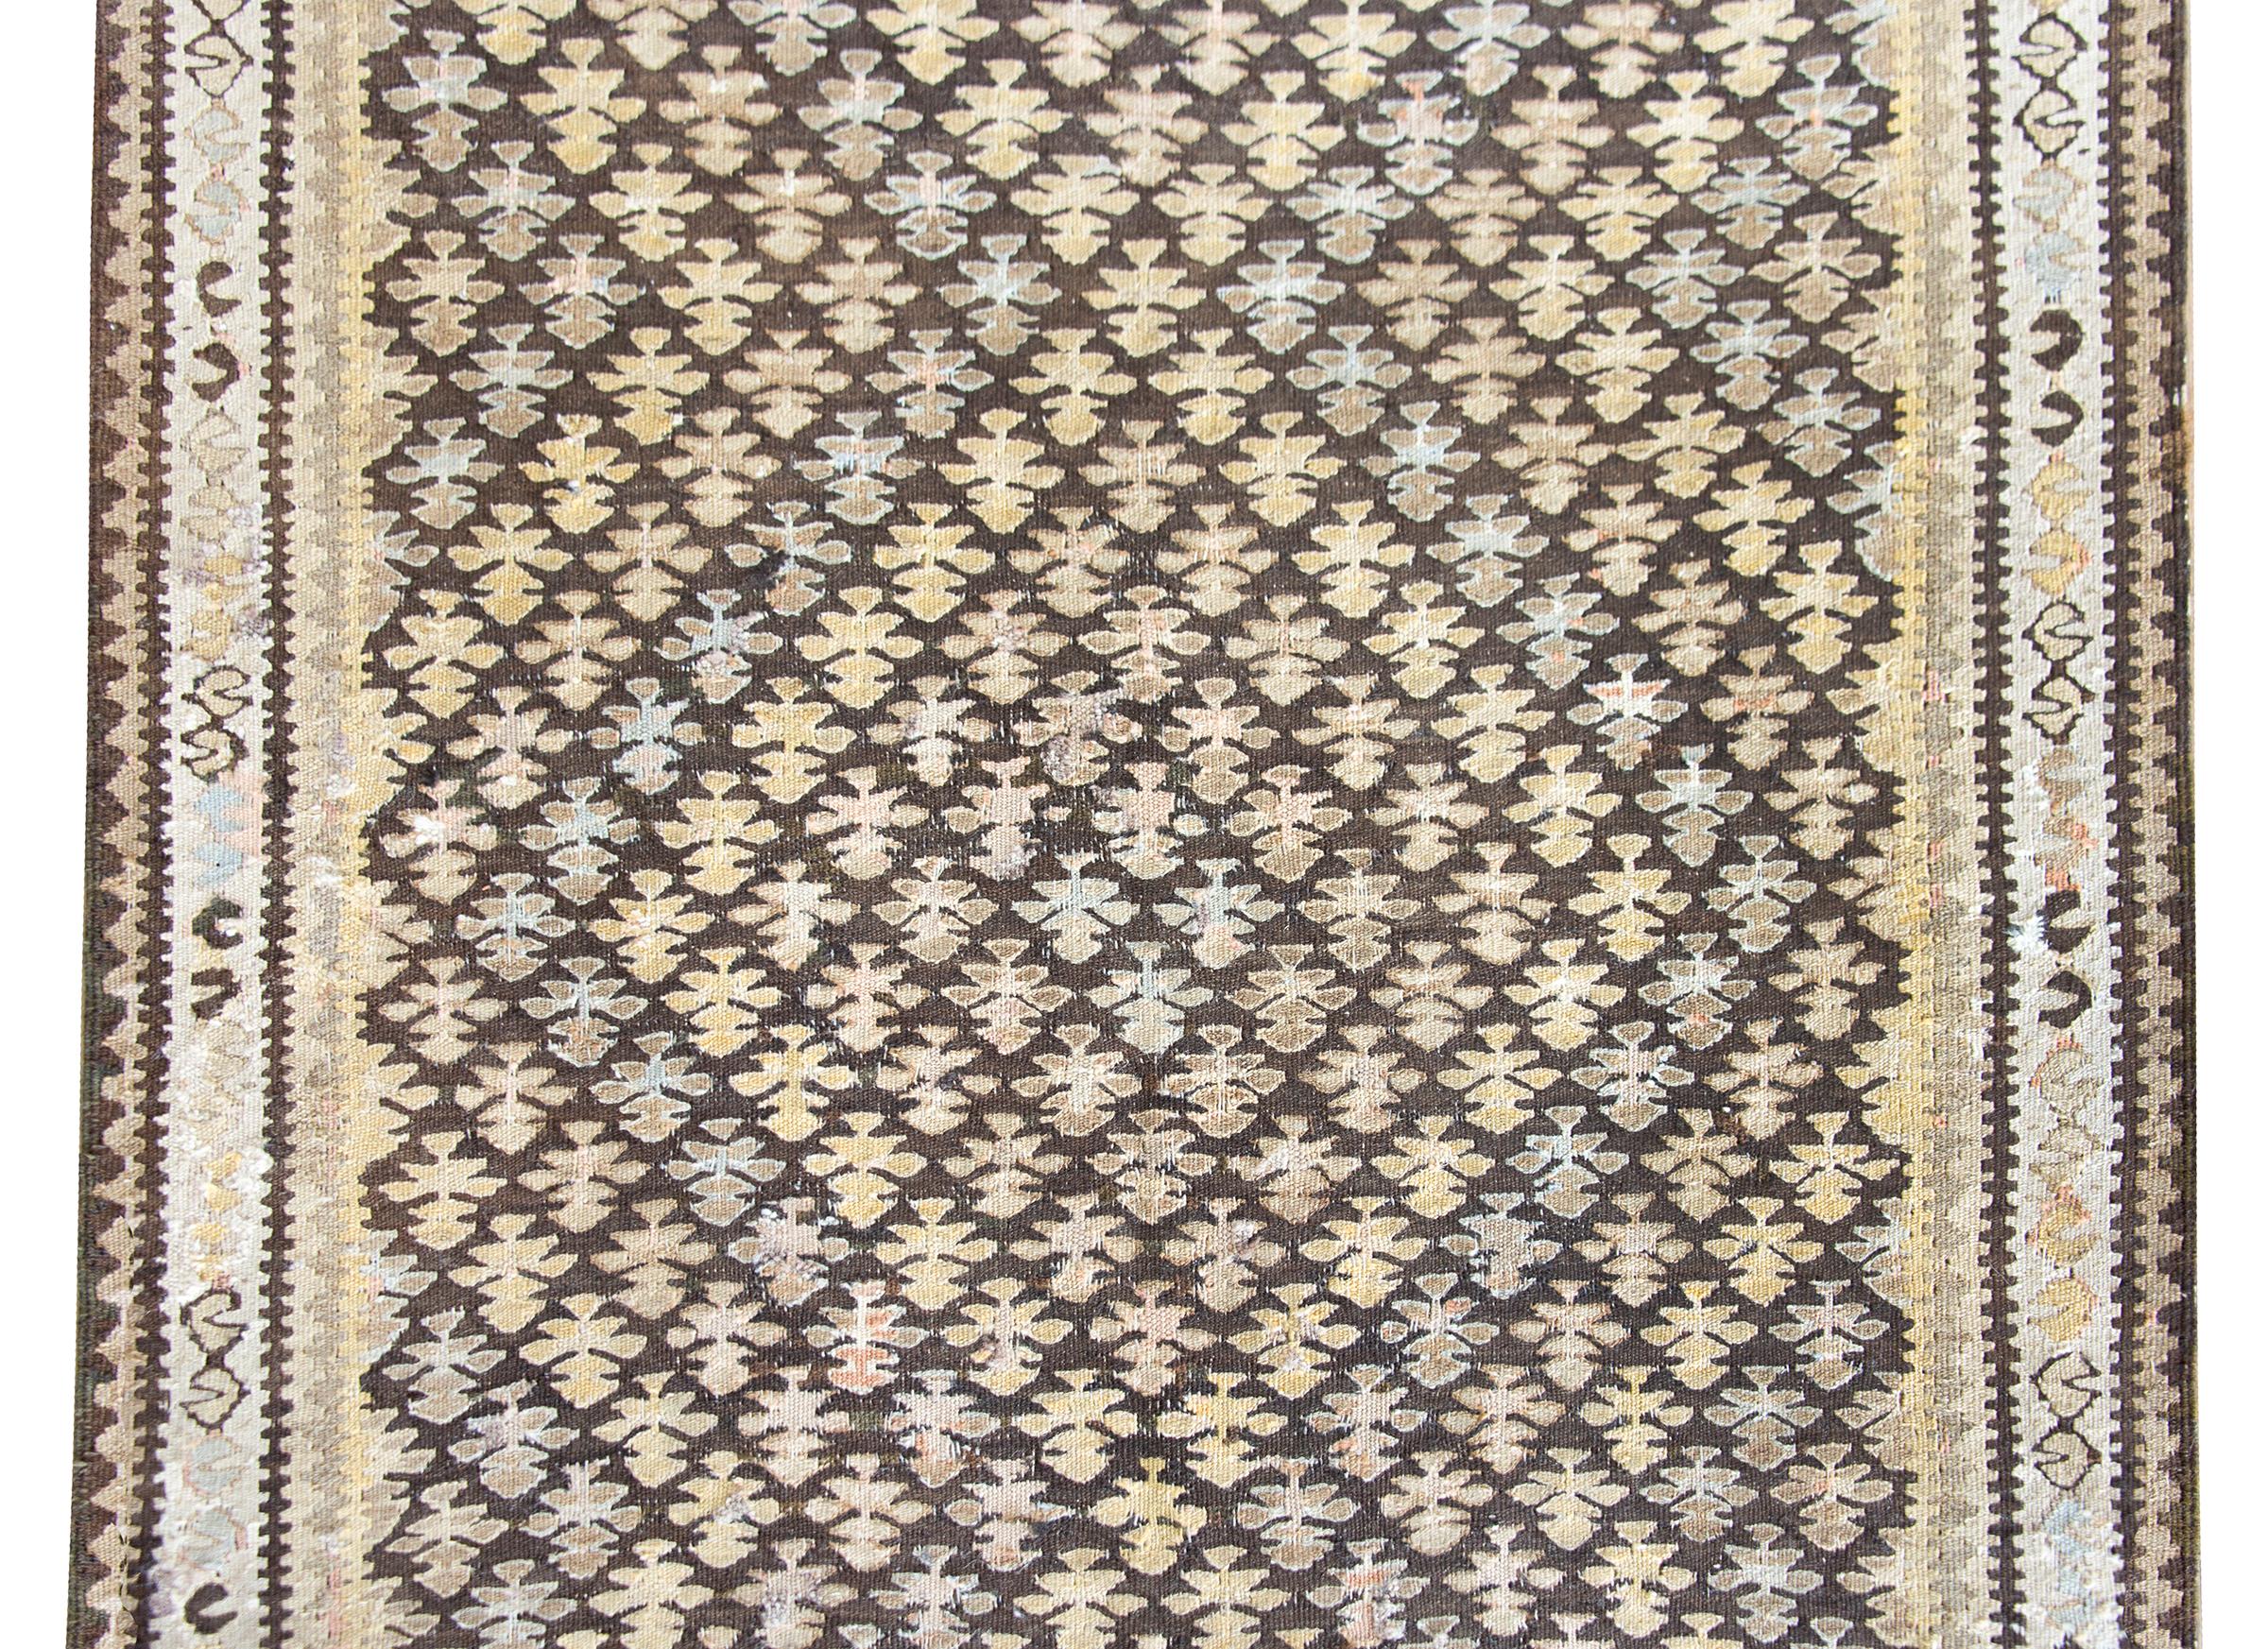 A wonderful early 20th century Persian Qazvin kilim rug with an all-over tree-of-life pattern woven with varying colored stripes creating a zigzag pattern across the field, and surrounded by several geometric patterned stripes.